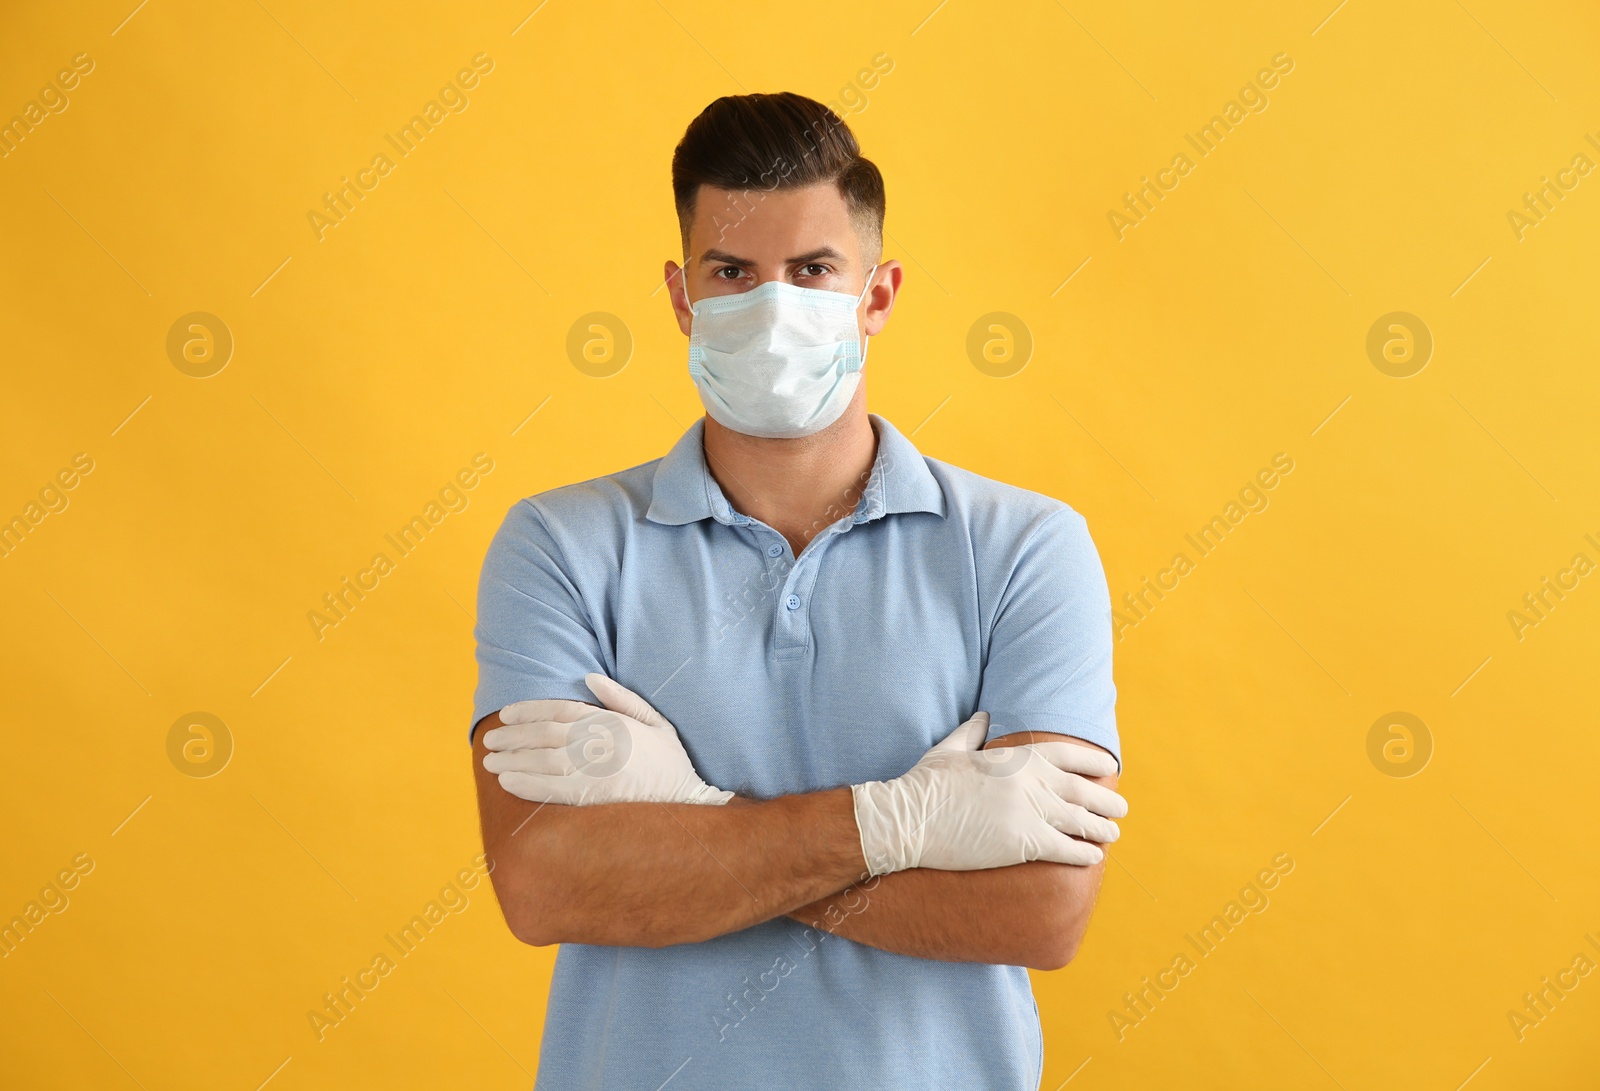 Photo of Man wearing protective face mask and medical gloves on yellow background